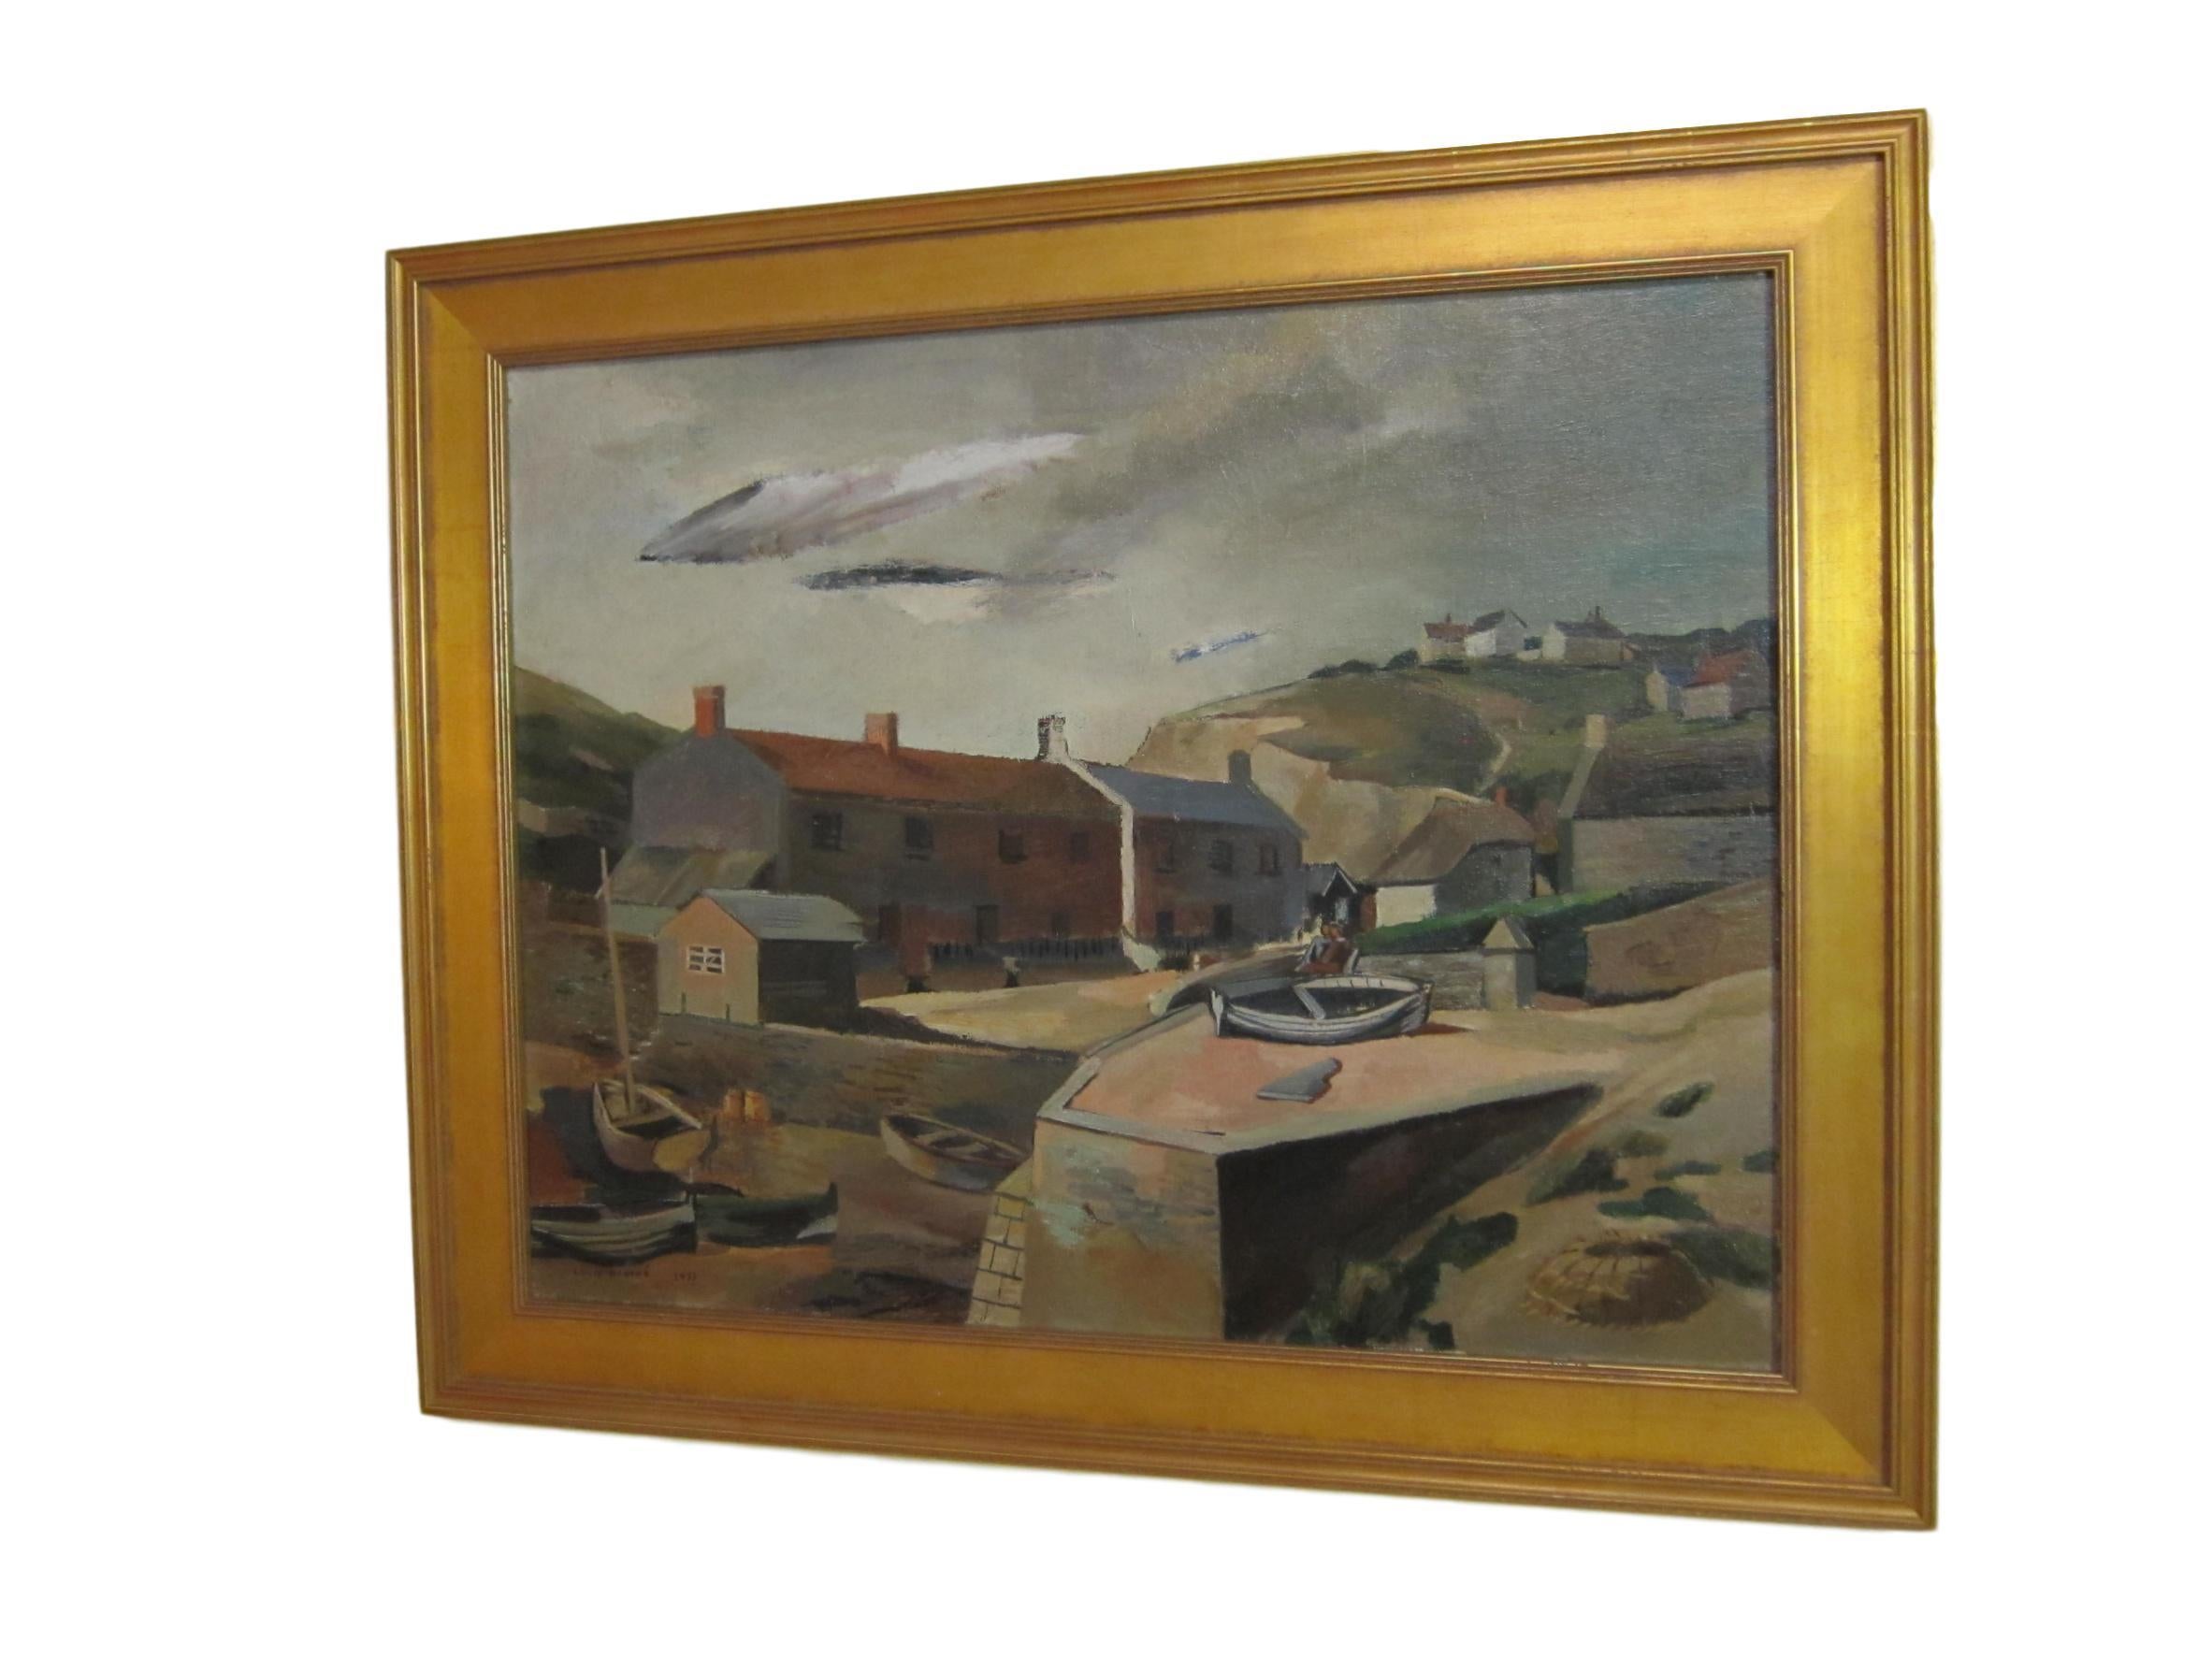 Louis Bouche modernist oil painting on canvas dated 1933 of Hope Cove, Devonshire.
Titled 'Hope Cove, Devonshire, England'.
Date: 1933
Medium: Oil painting on canvas.
Measurements: 21.5 inches x 27.75 inches sight size, and 27.5 inches x 33.75